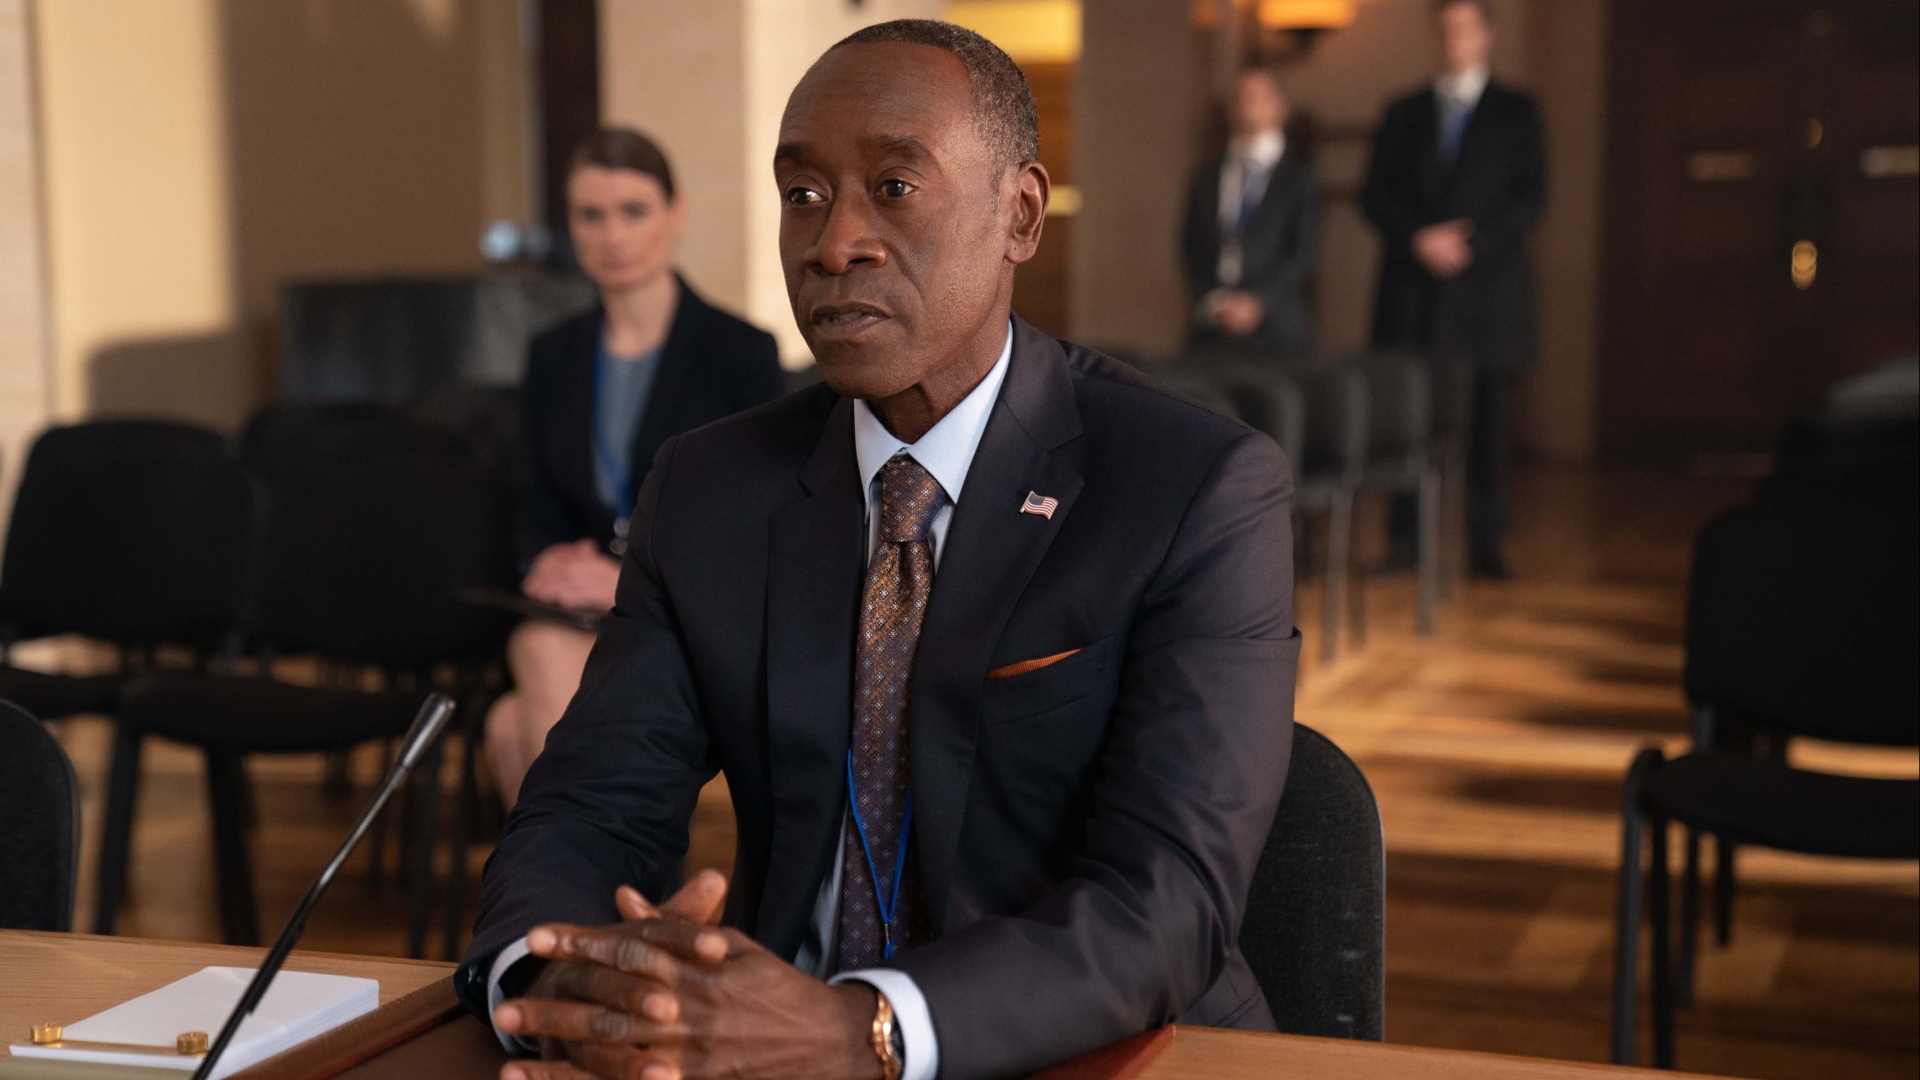 Secret Invasion' Director on the Finale and How Long Rhodey Has